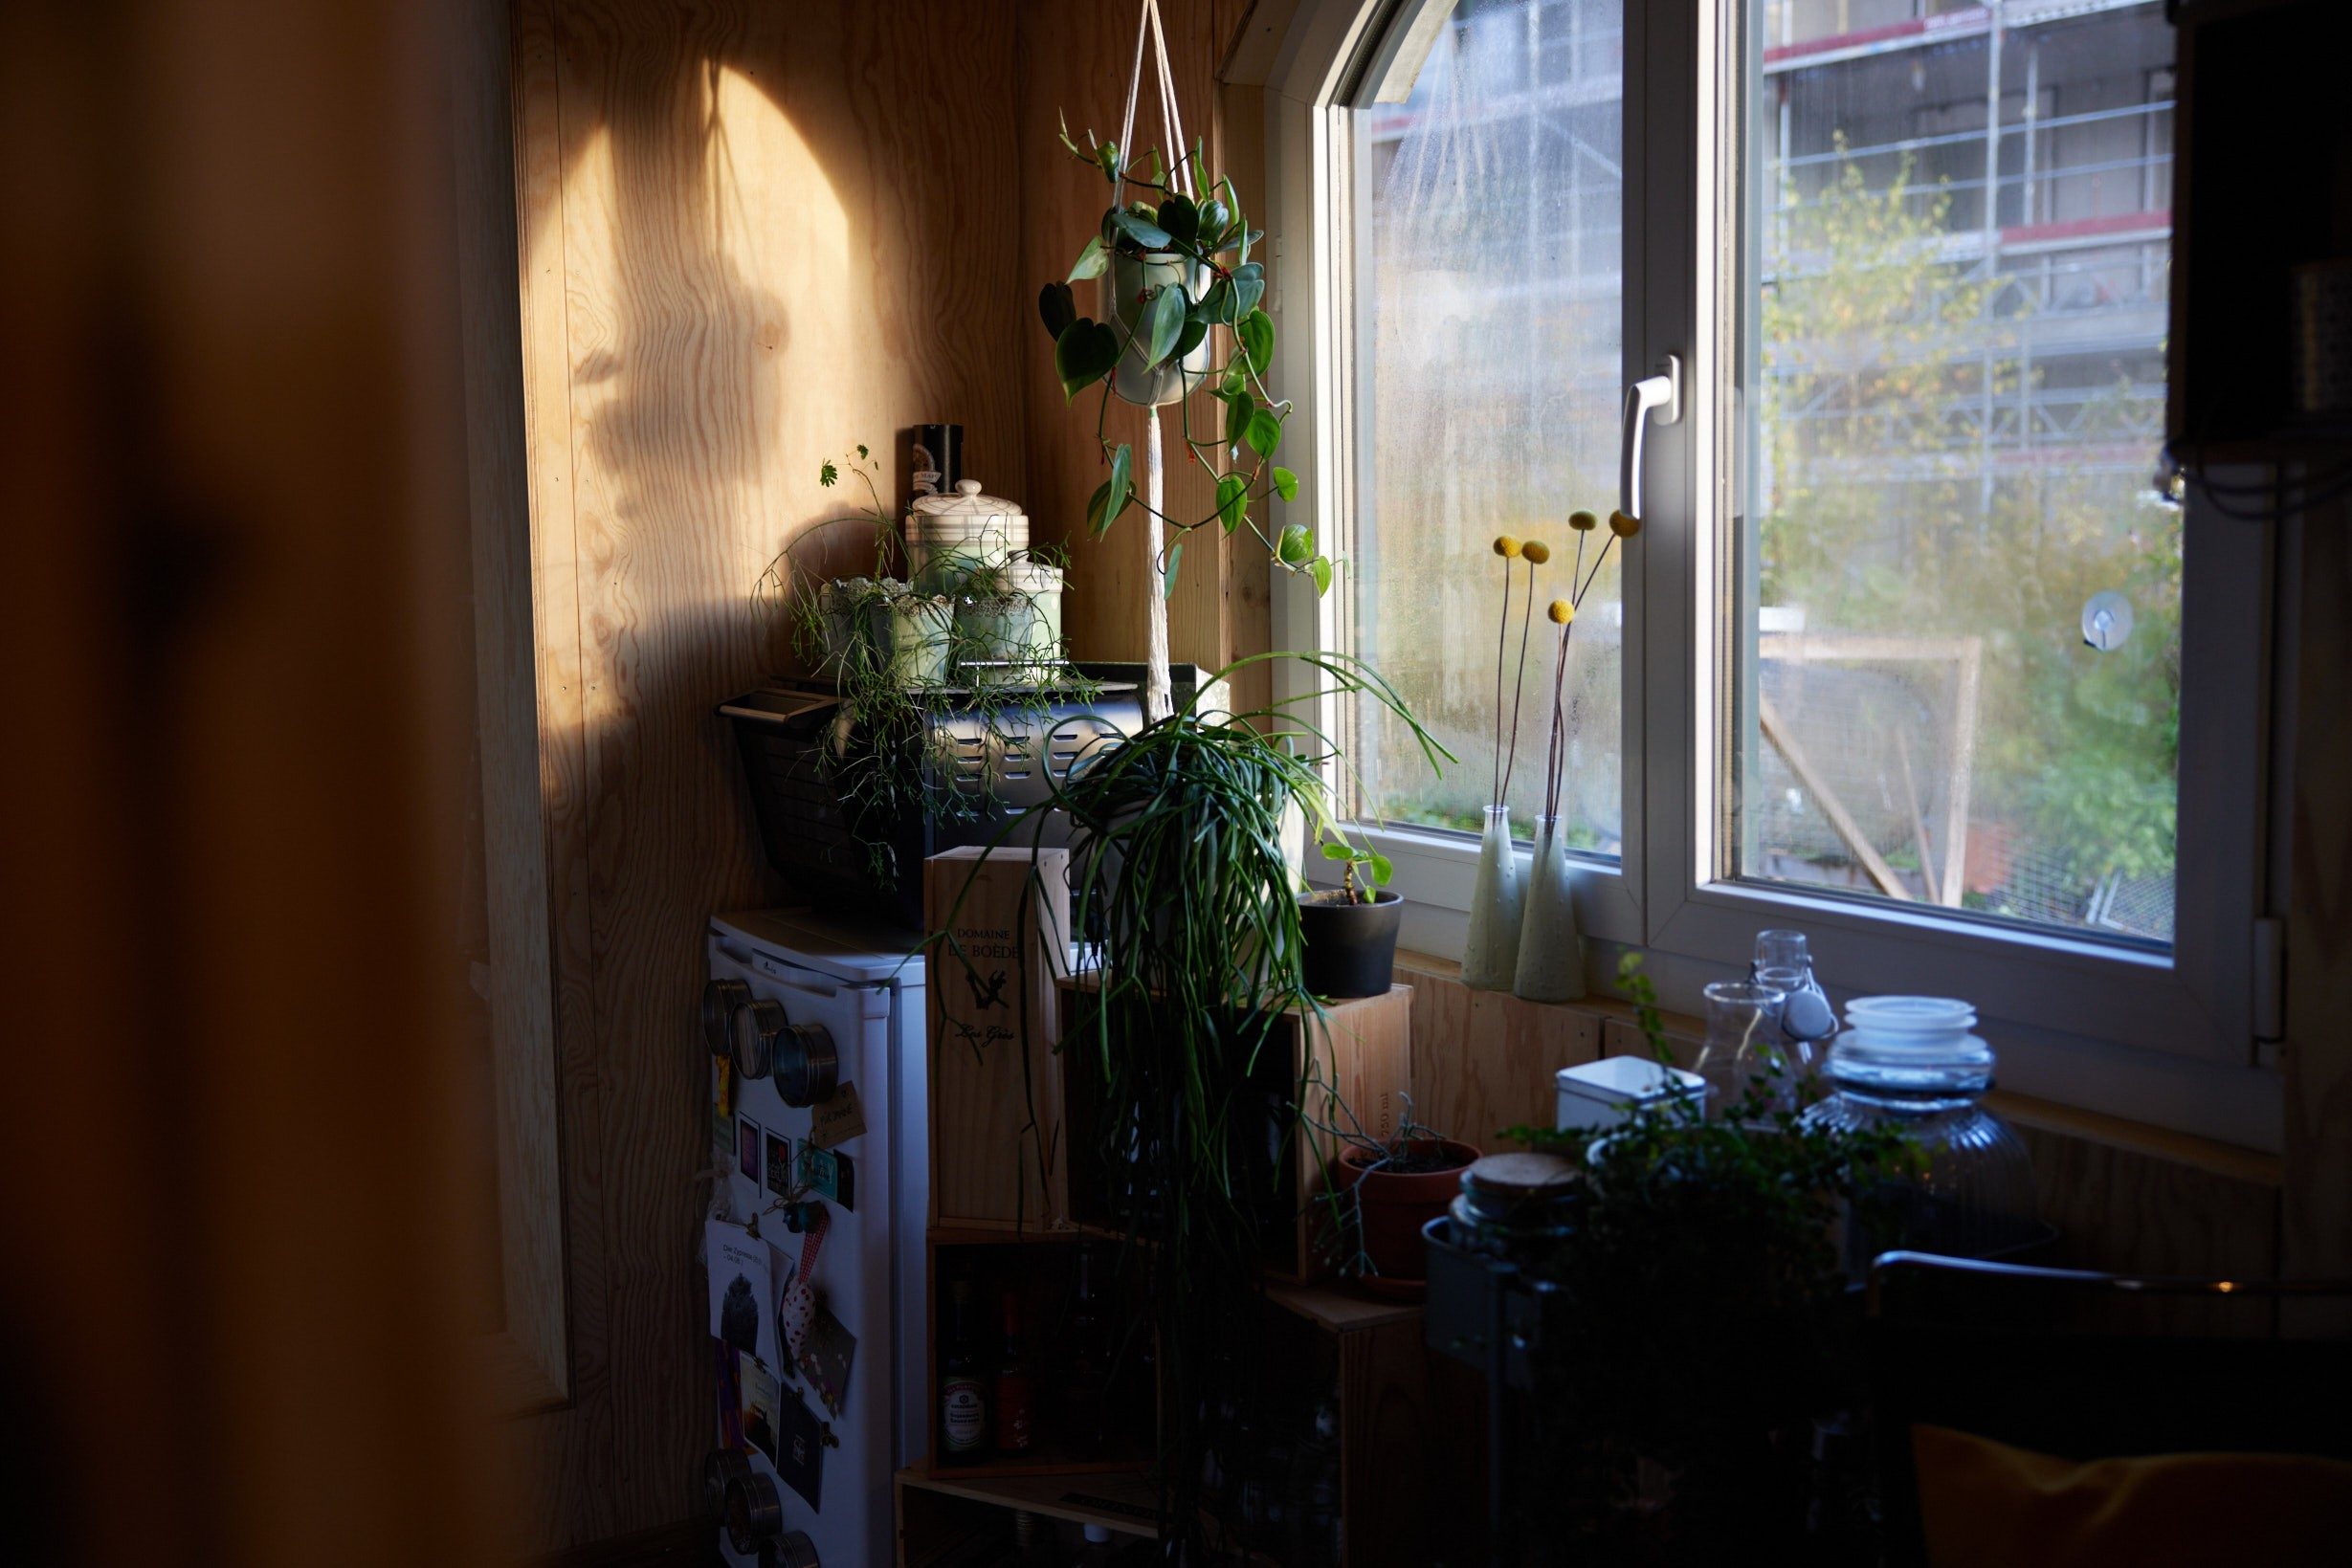 Inside a room with a window, with plants in front of it and hanging down from above it.